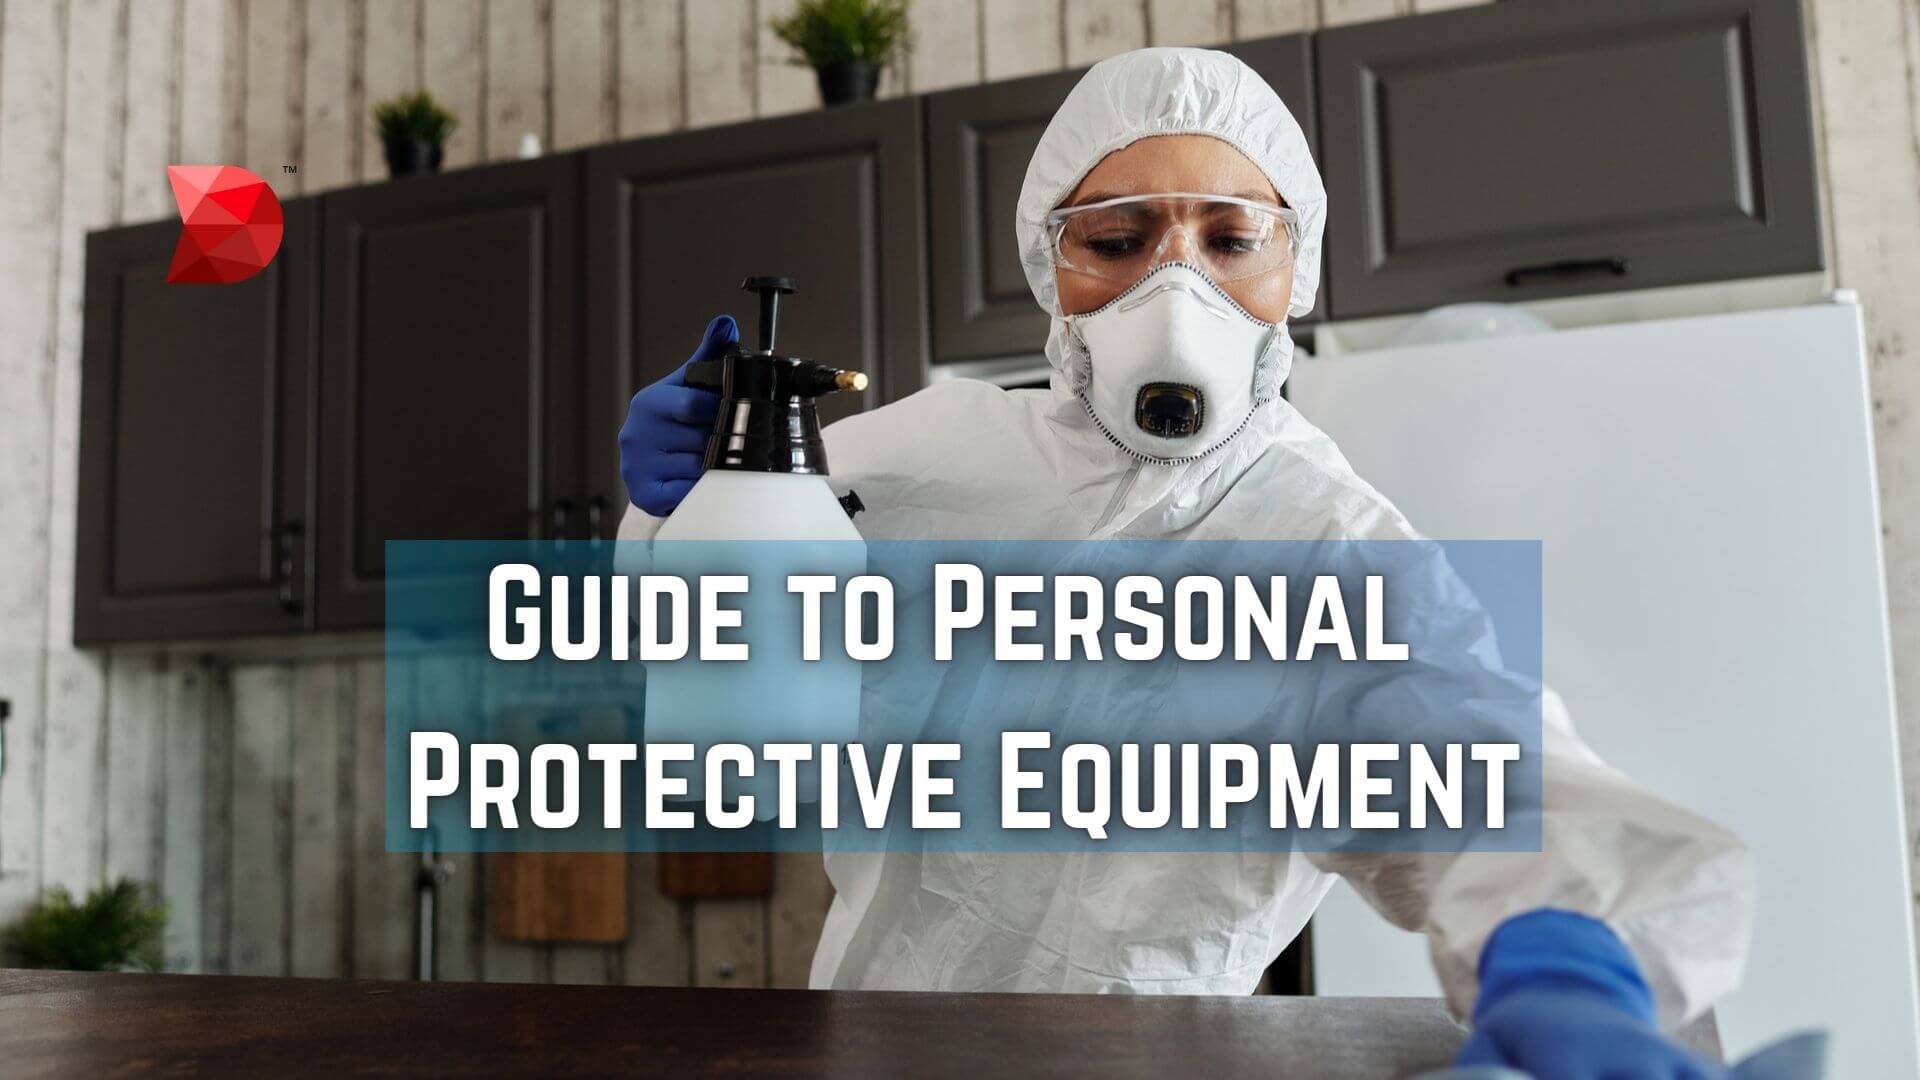 Guide to Personal Protective Equipment